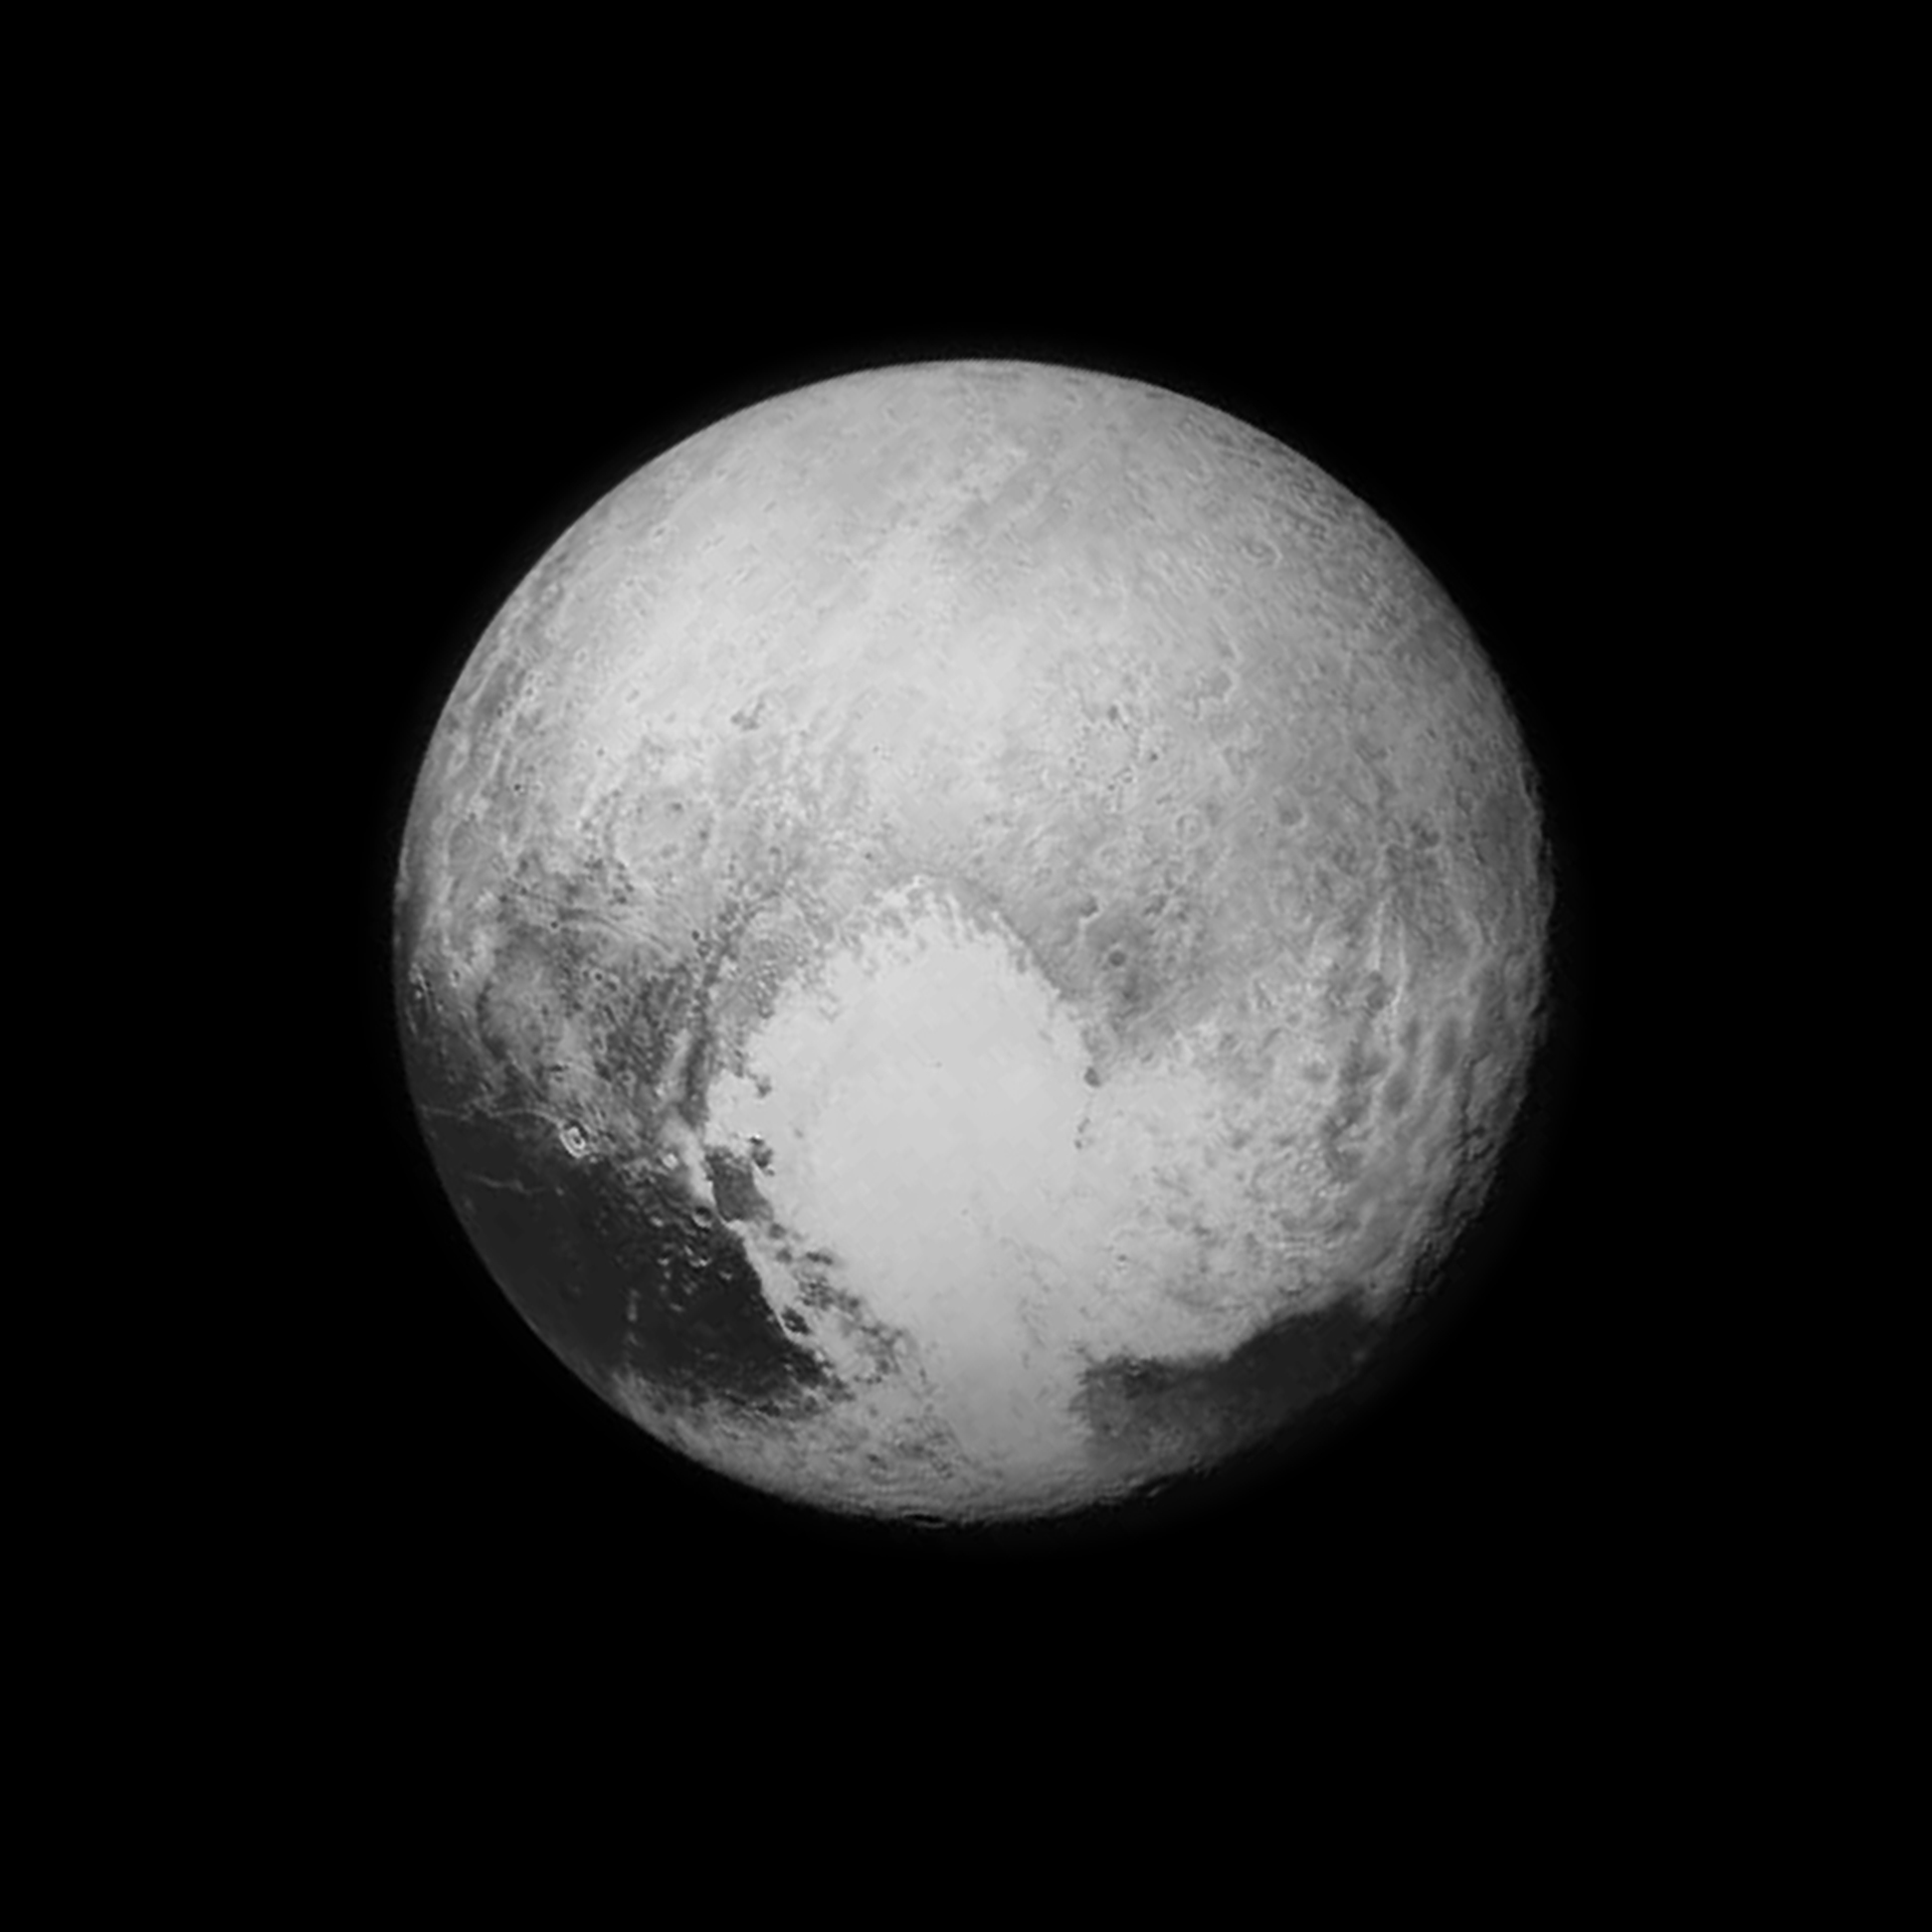 A black and white photo of Pluto silhouetted against the emptiness of the outer solar system